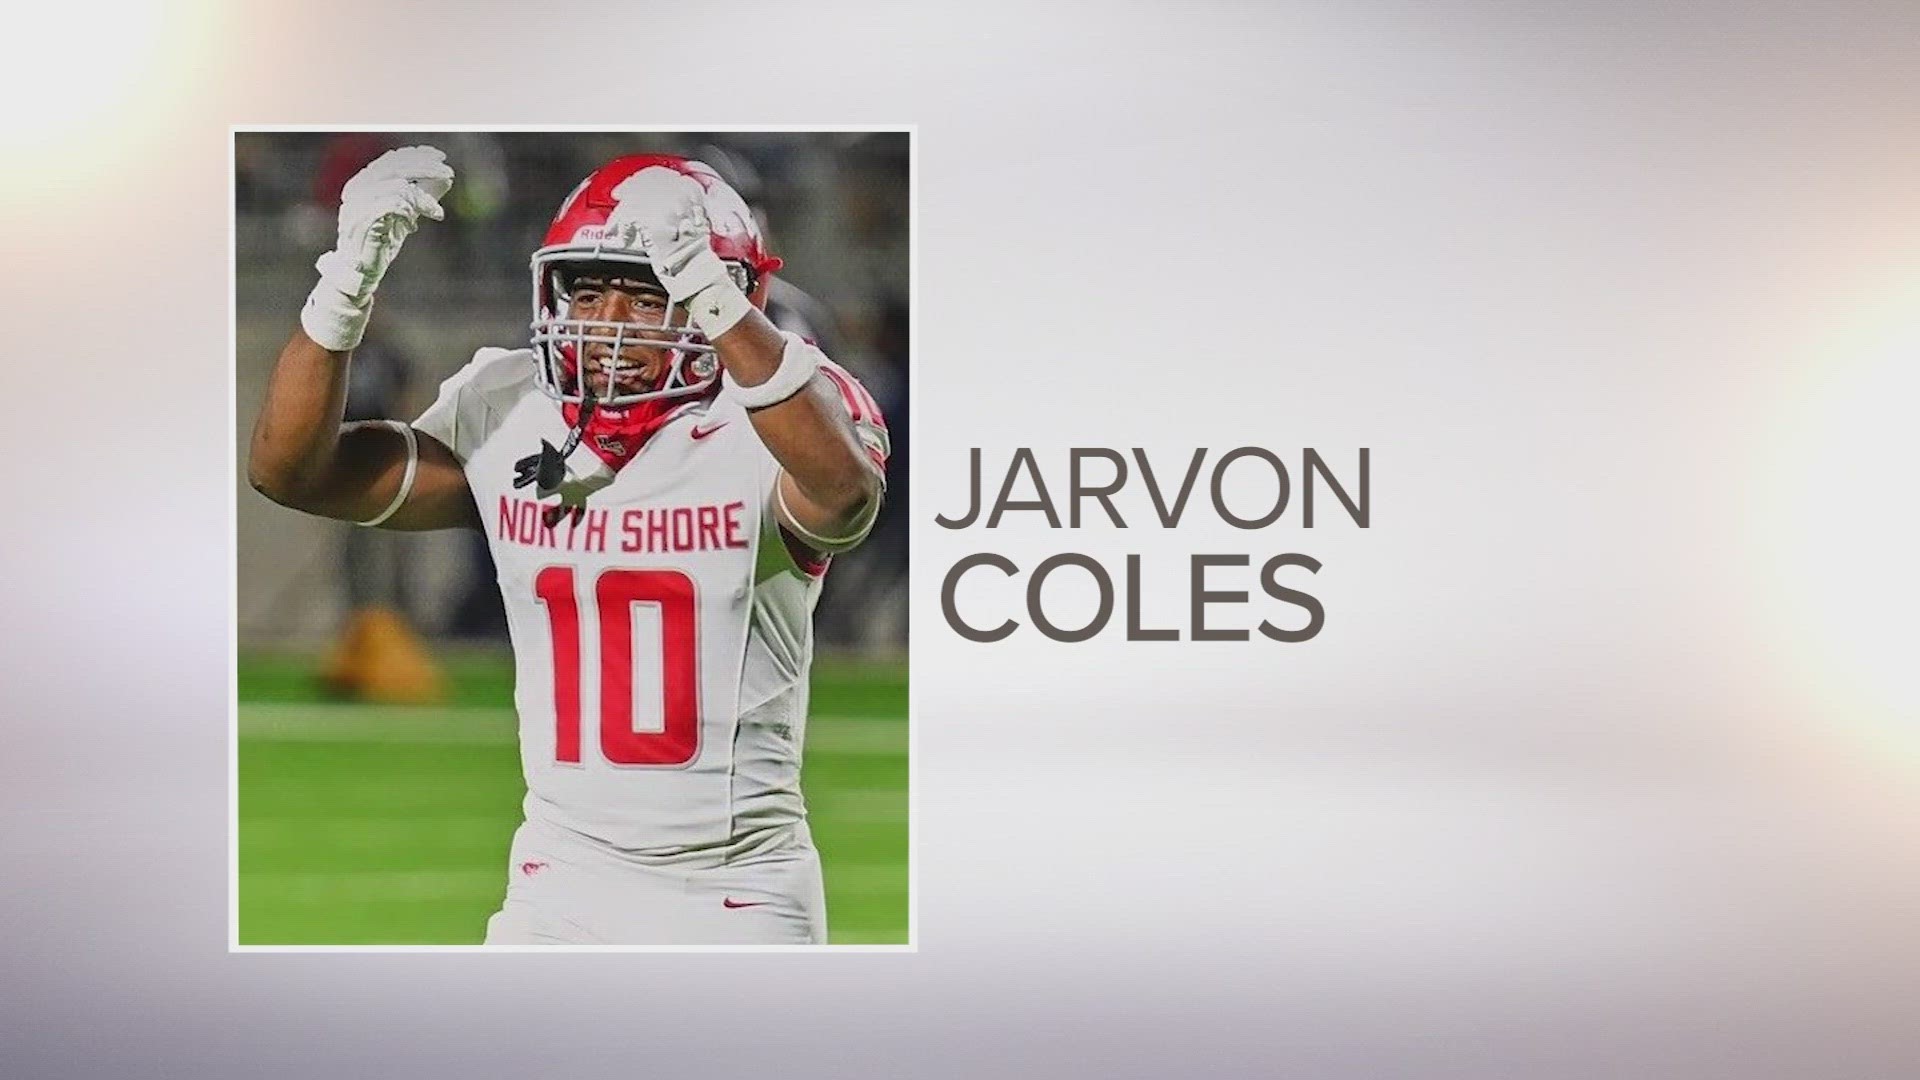 Jarvon Coles' grandfather and guardian said the North Shore HS senior had a 4.1 GPA and had been accepted into 15 colleges. He planned to play football at Lamar.